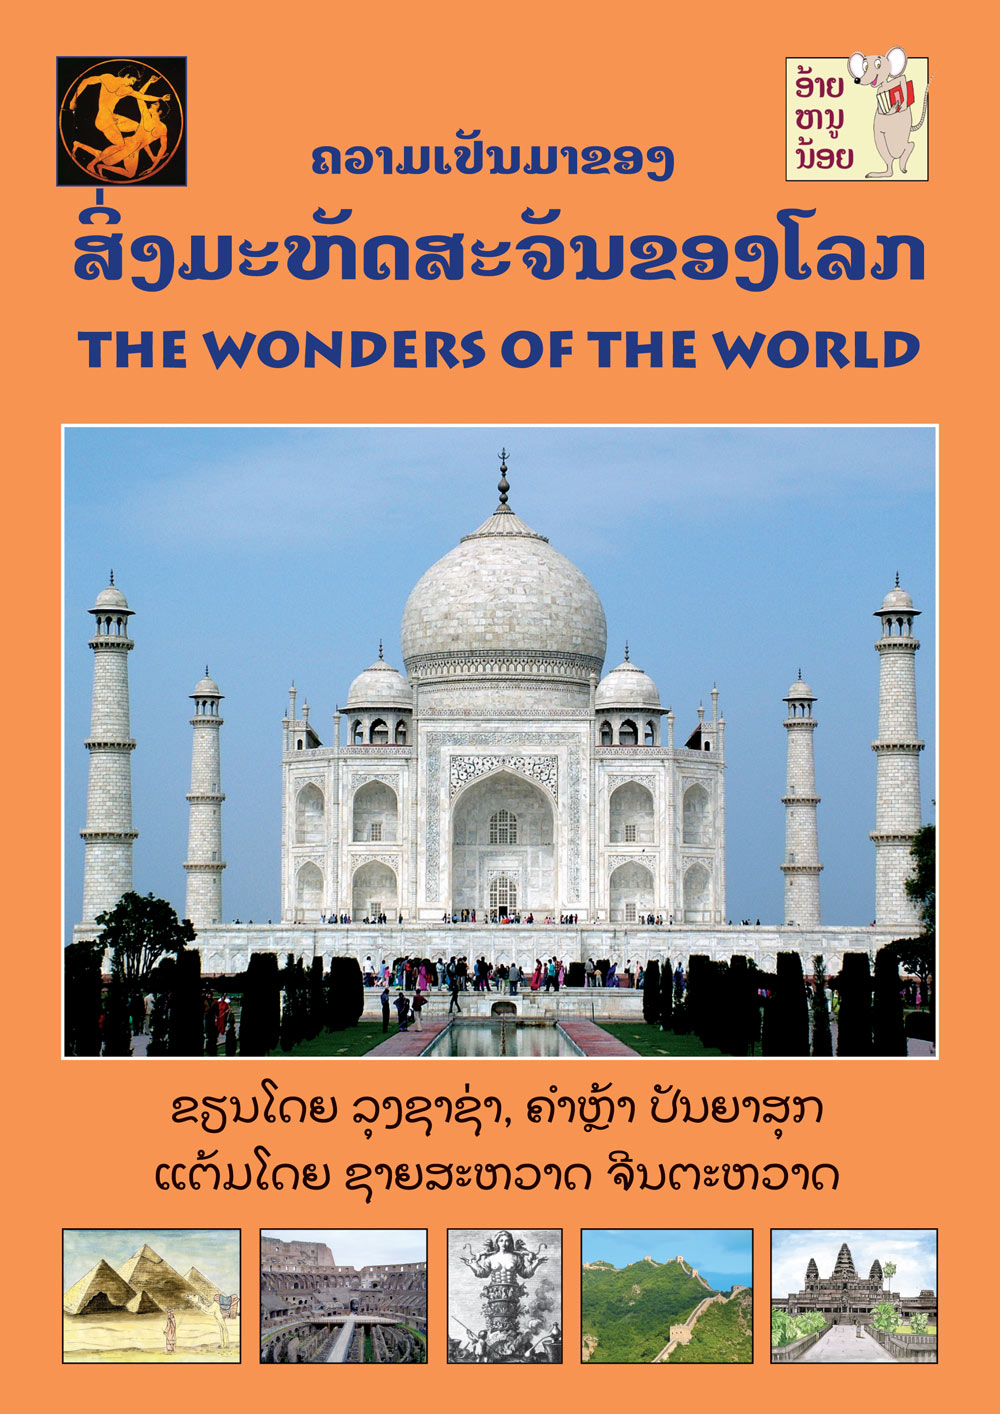 The Wonders of the World large book cover, published in Lao and English